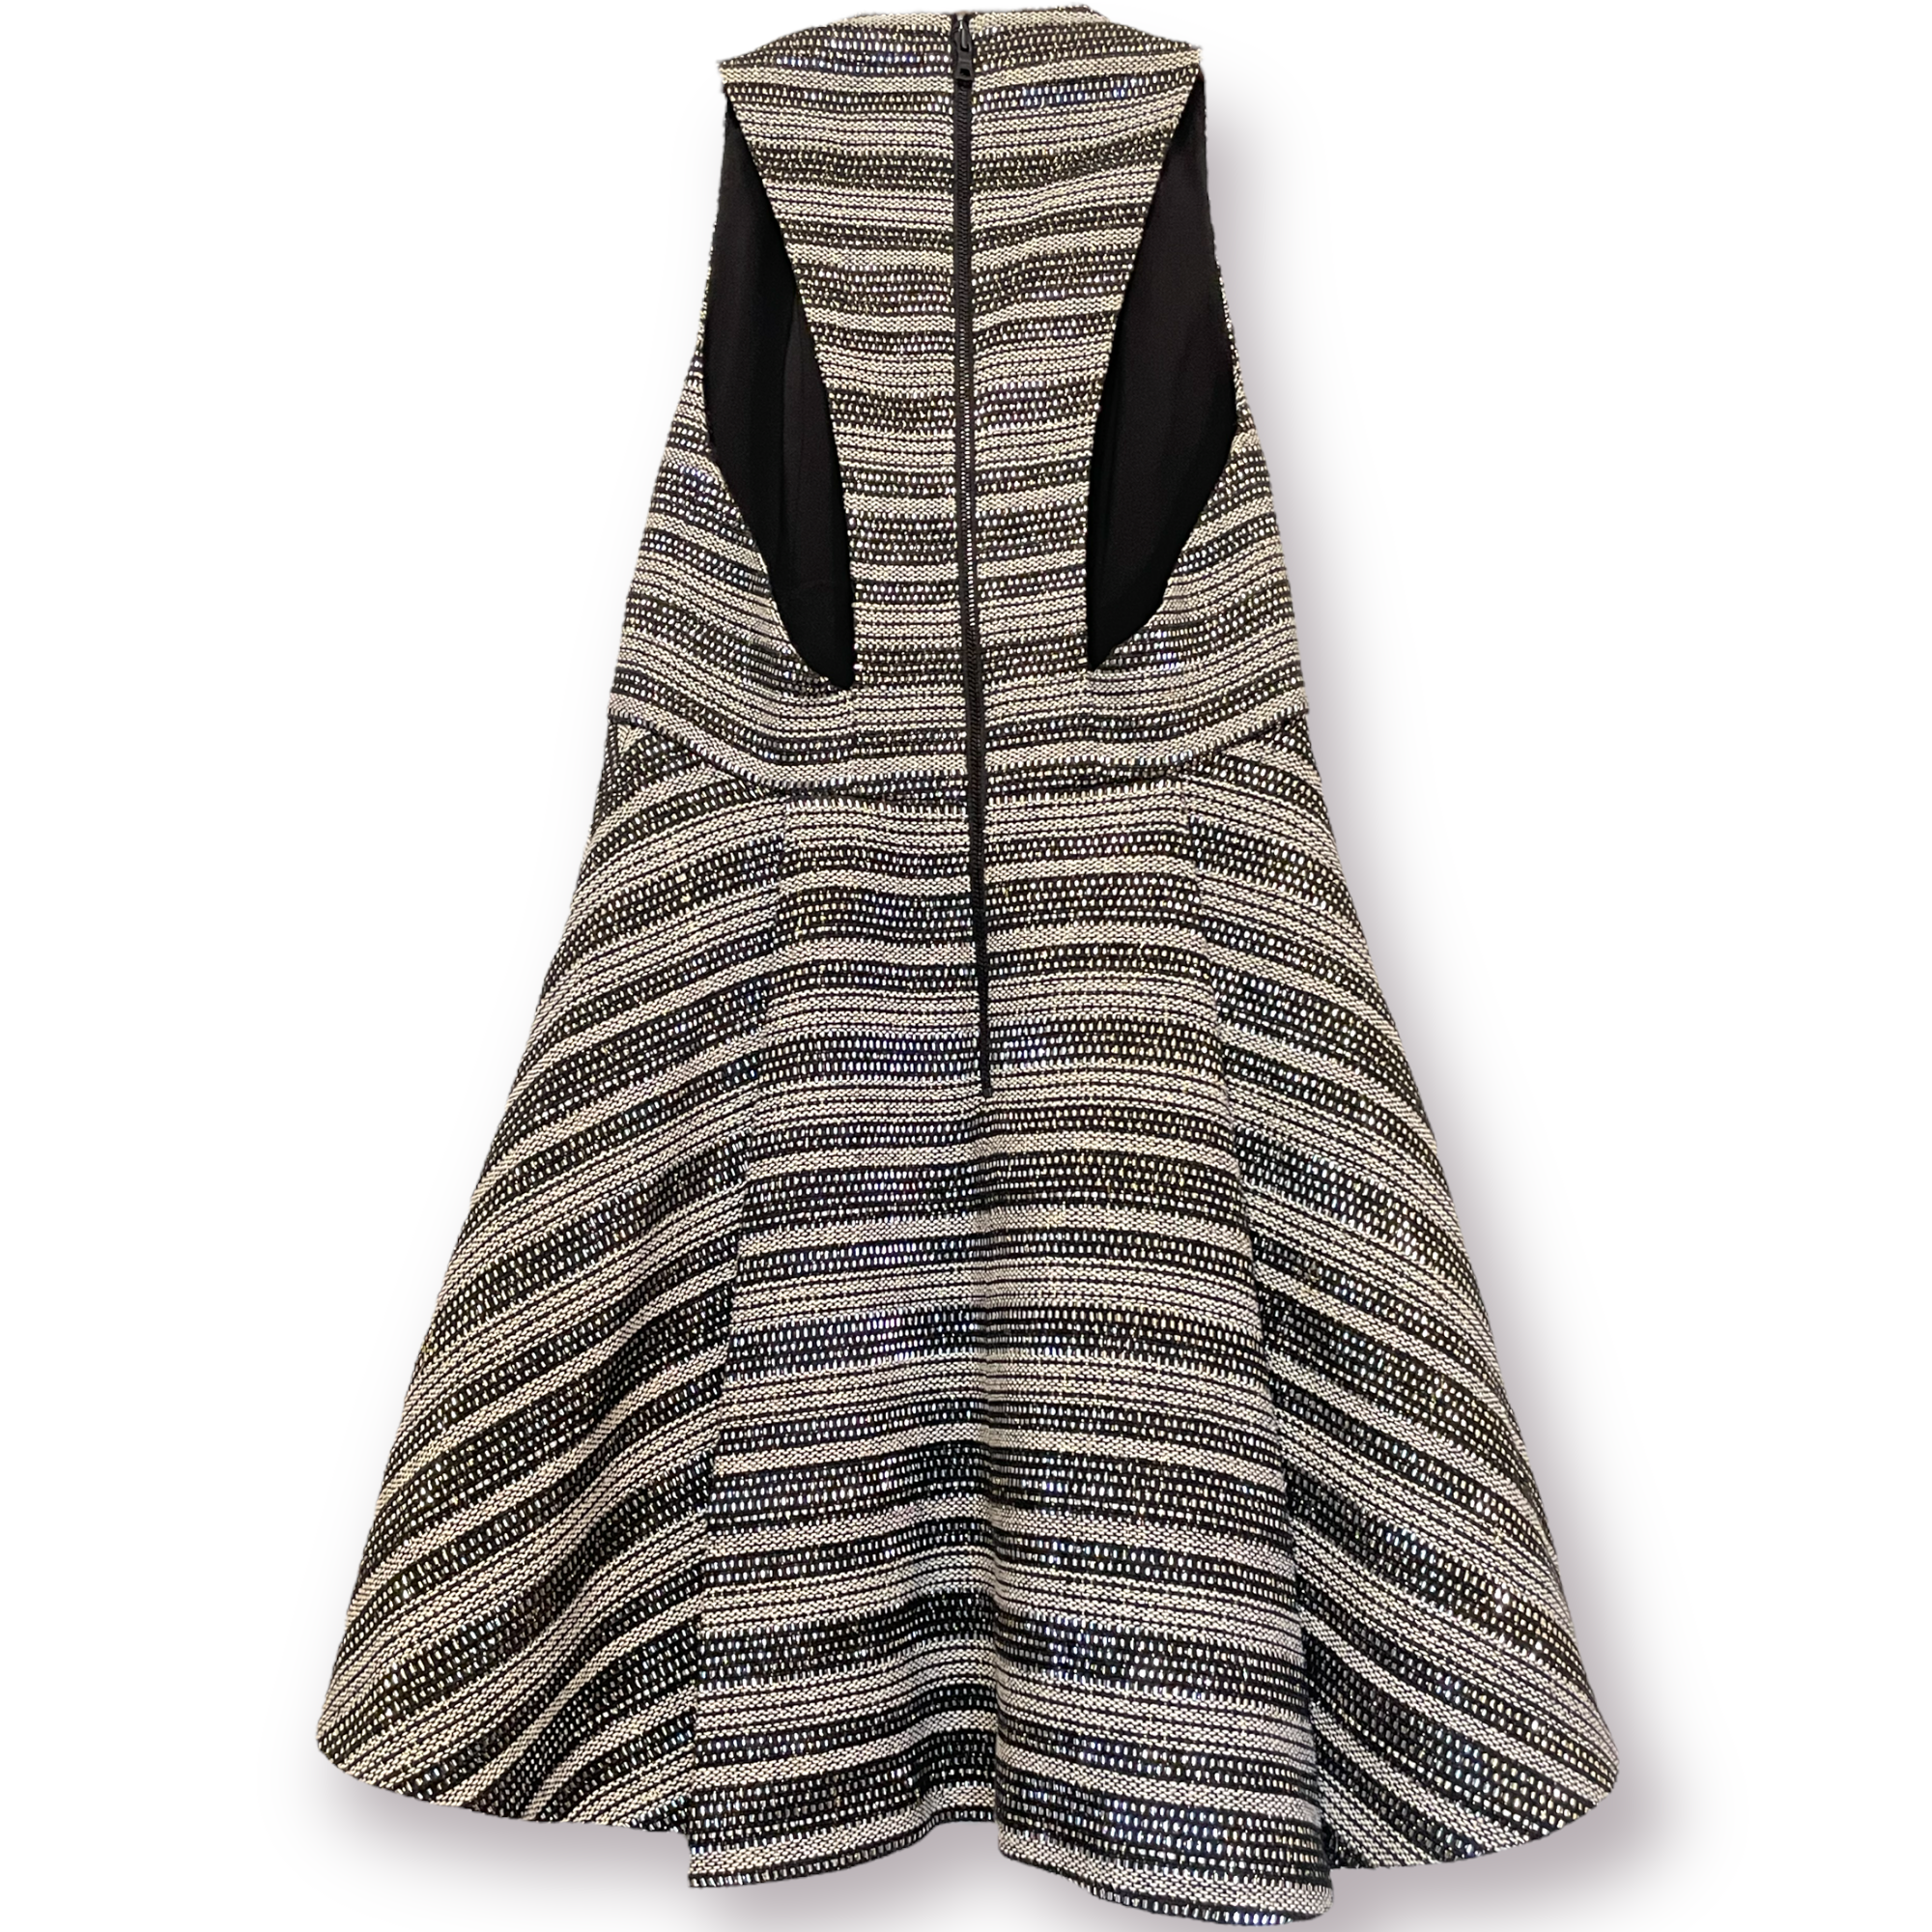 Alice + Olivia Patterned Dress with GORGEOUS Pleats & Cutout Side/Back |Size: 6|